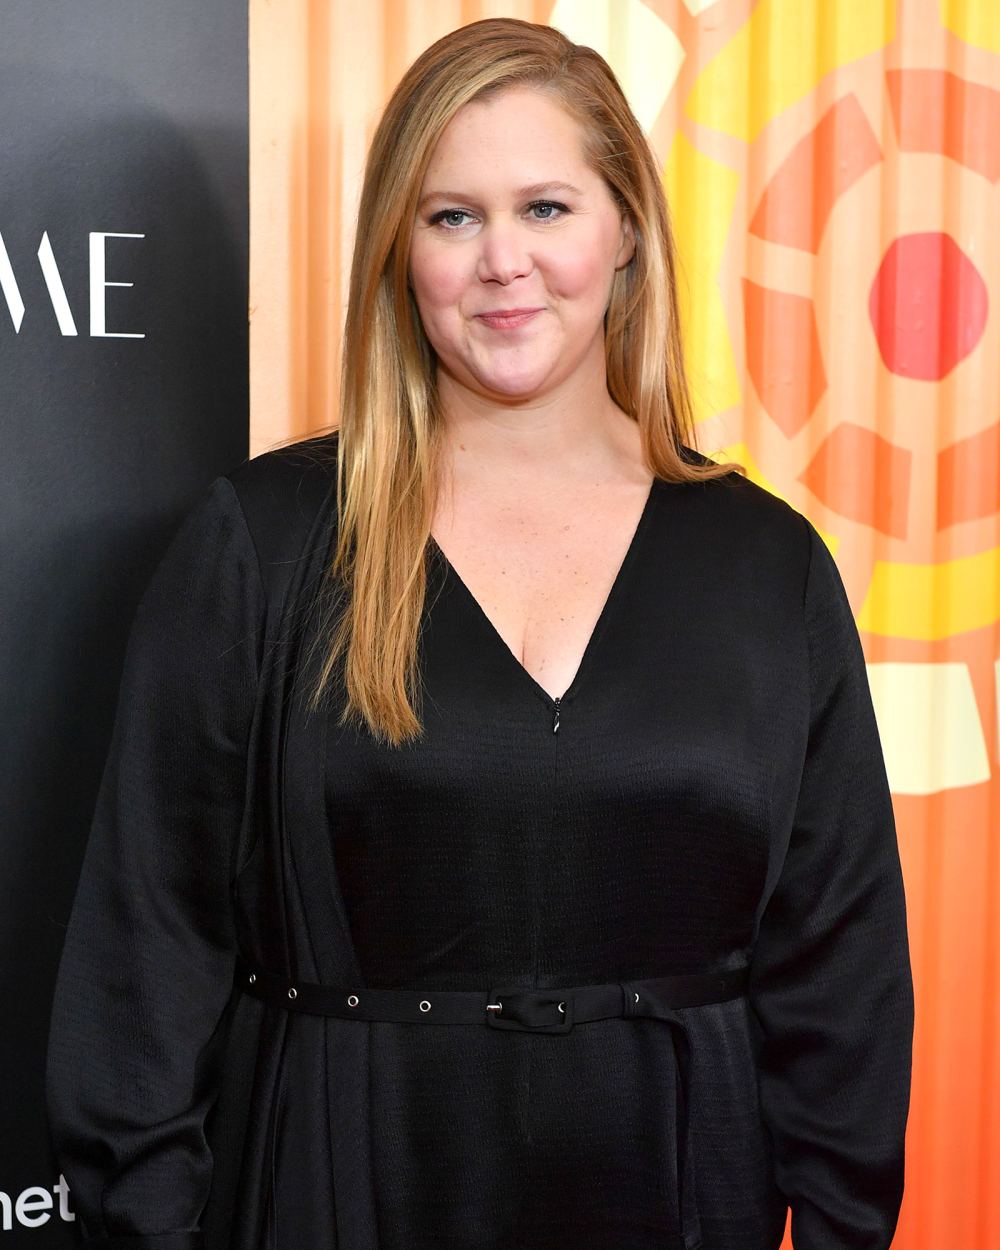 Amy Schumer Shares Footage Reacting to Pregnancy News in ‘Expecting Amy’: ‘So Excited’